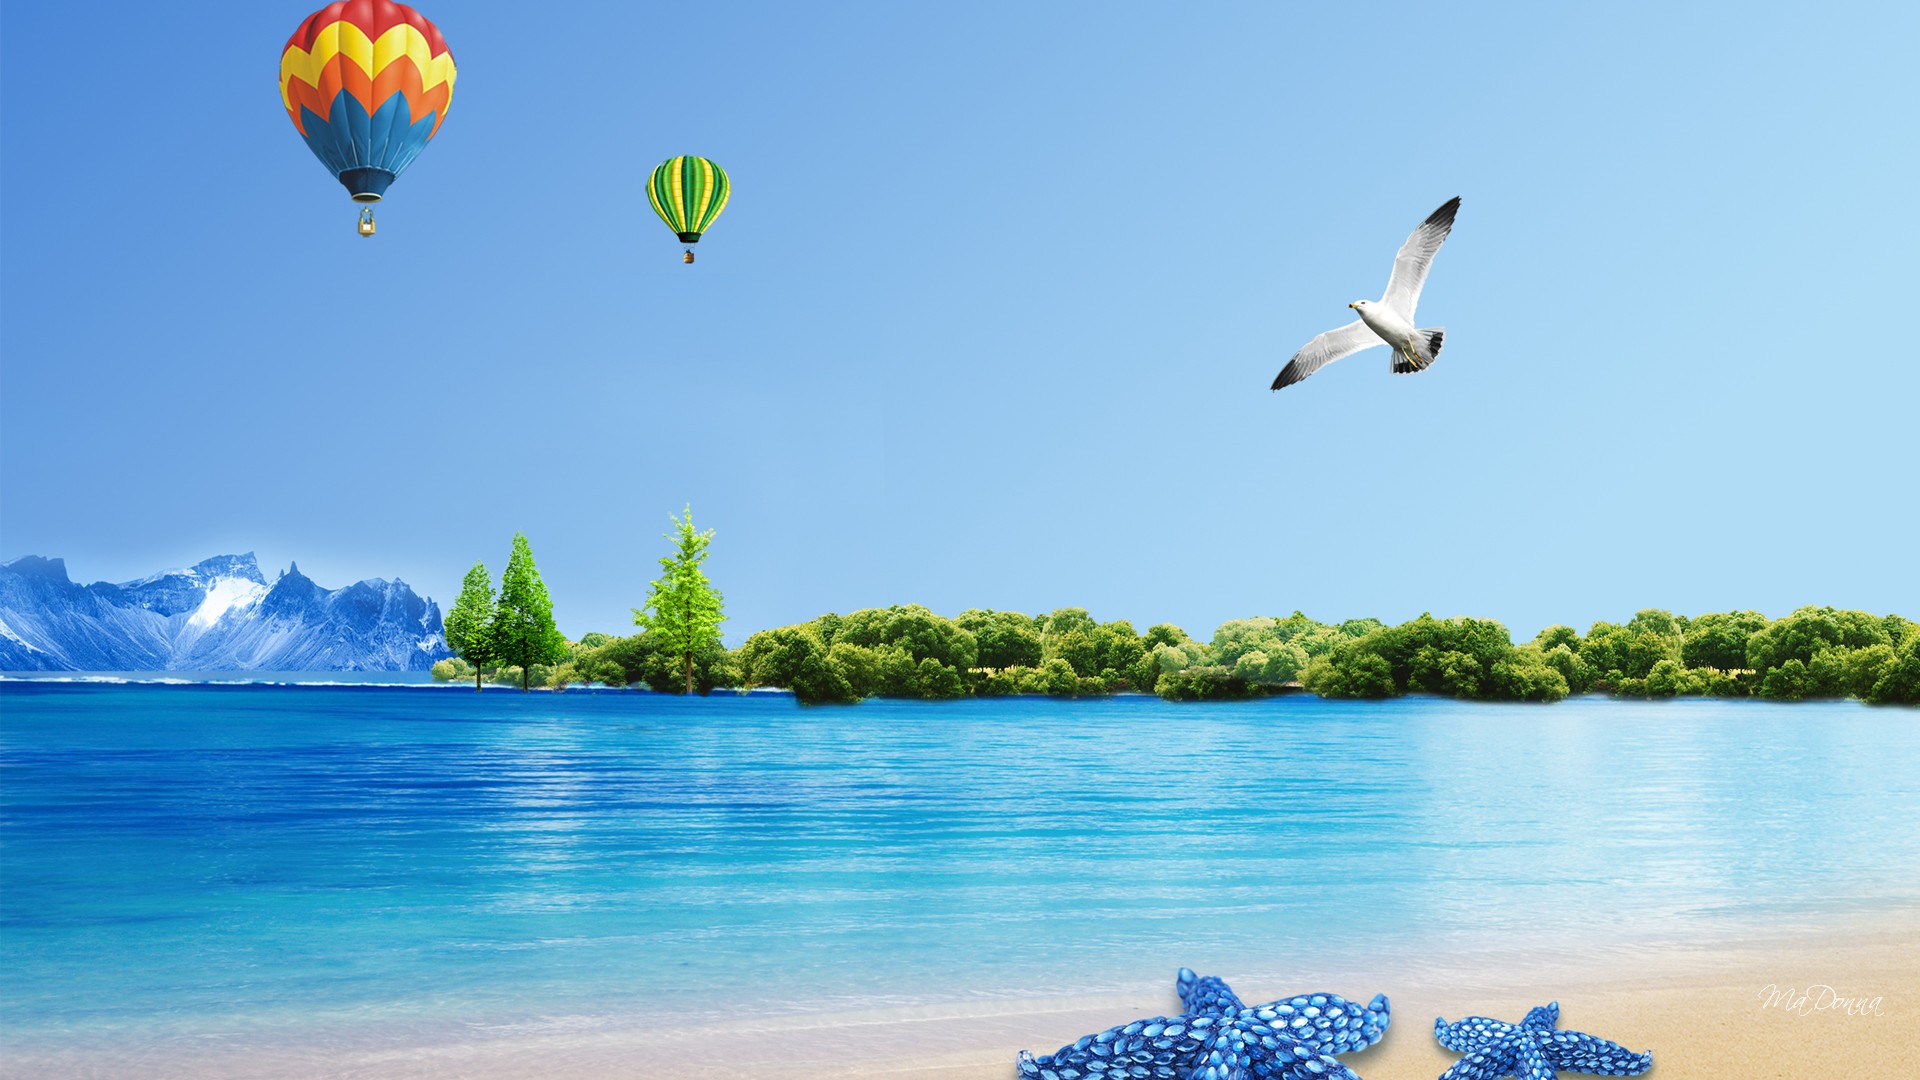 Download Summer Backgrounds Wallpaper pictures in high definition or